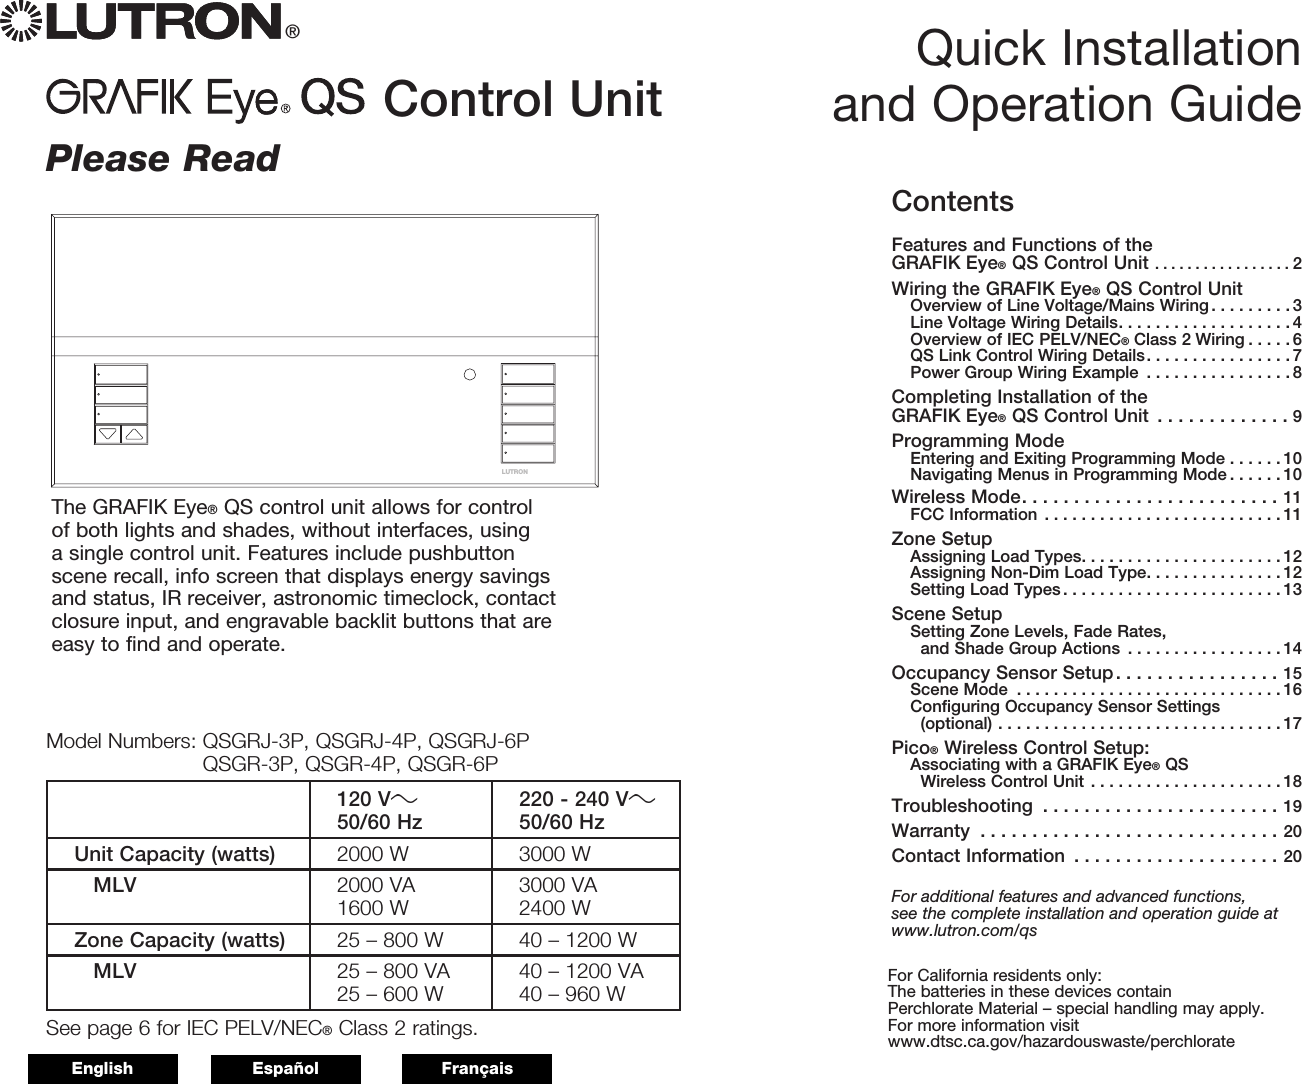 LUTRONControl Unit Quick Installation and Operation Guide®Please ReadThe GRAFIK Eye® QS control unit allows for control of both lights and shades, without interfaces, using a single control unit. Features include pushbutton scene recall, info screen that displays energy savings and status, IR receiver, astronomic timeclock, contact closure input, and engravable backlit buttons that are easy to find and operate.Model Numbers:  QSGRJ-3P, QSGRJ-4P, QSGRJ-6P QSGR-3P, QSGR-4P, QSGR-6P120 V50/60 Hz 220 - 240 V50/60 HzUnit Capacity (watts) 2000 W 3000 W MLV 2000 VA 1600 W 3000 VA 2400 WZone Capacity (watts) 25 – 800 W 40 – 1200 W MLV 25 – 800 VA25 – 600 W 40 – 1200 VA40 – 960 WSee page 6 for IEC PELV/NEC® Class 2 ratings.For California residents only:The batteries in these devices contain  Perchlorate Material – special handling may apply.For more information visit  www.dtsc.ca.gov/hazardouswaste/perchlorateContentsFeatures and Functions of the GRAFIK Eye® QS Control Unit .................2Wiring the GRAFIK Eye® QS Control UnitOverview of Line Voltage/Mains Wiring . . . . . . . . . 3Line Voltage Wiring Details. . . . . . . . . . . . . . . . . . . 4Overview of IEC PELV/NEC® Class 2 Wiring . . . . . 6QS Link Control Wiring Details. . . . . . . . . . . . . . . . 7Power Group Wiring Example  . . . . . . . . . . . . . . . .8Completing Installation of the  GRAFIK Eye® QS Control Unit  . . . . . . . . . . . . . 9Programming ModeEntering and Exiting Programming Mode . . . . . . 10Navigating Menus in Programming Mode . . . . . . 10Wireless Mode.........................11FCC Information ..........................11Zone SetupAssigning Load Types. . . . . . . . . . . . . . . . . . . . . . 12Assigning Non-Dim Load Type. . . . . . . . . . . . . . . 12Setting Load Types........................13Scene SetupSetting Zone Levels, Fade Rates,  and Shade Group Actions  . . . . . . . . . . . . . . . . . 14Occupancy Sensor Setup. . . . . . . . . . . . . . . . 15Scene Mode .............................16Configuring Occupancy Sensor Settings  (optional) ...............................17Pico® Wireless Control Setup:Associating with a GRAFIK Eye® QS  Wireless Control Unit . . . . . . . . . . . . . . . . . . . . . 18Troubleshooting .......................19Warranty .............................20Contact Information  . . . . . . . . . . . . . . . . . . . . 20For additional features and advanced functions,  see the complete installation and operation guide at www.lutron.com/qsEnglish Español Français